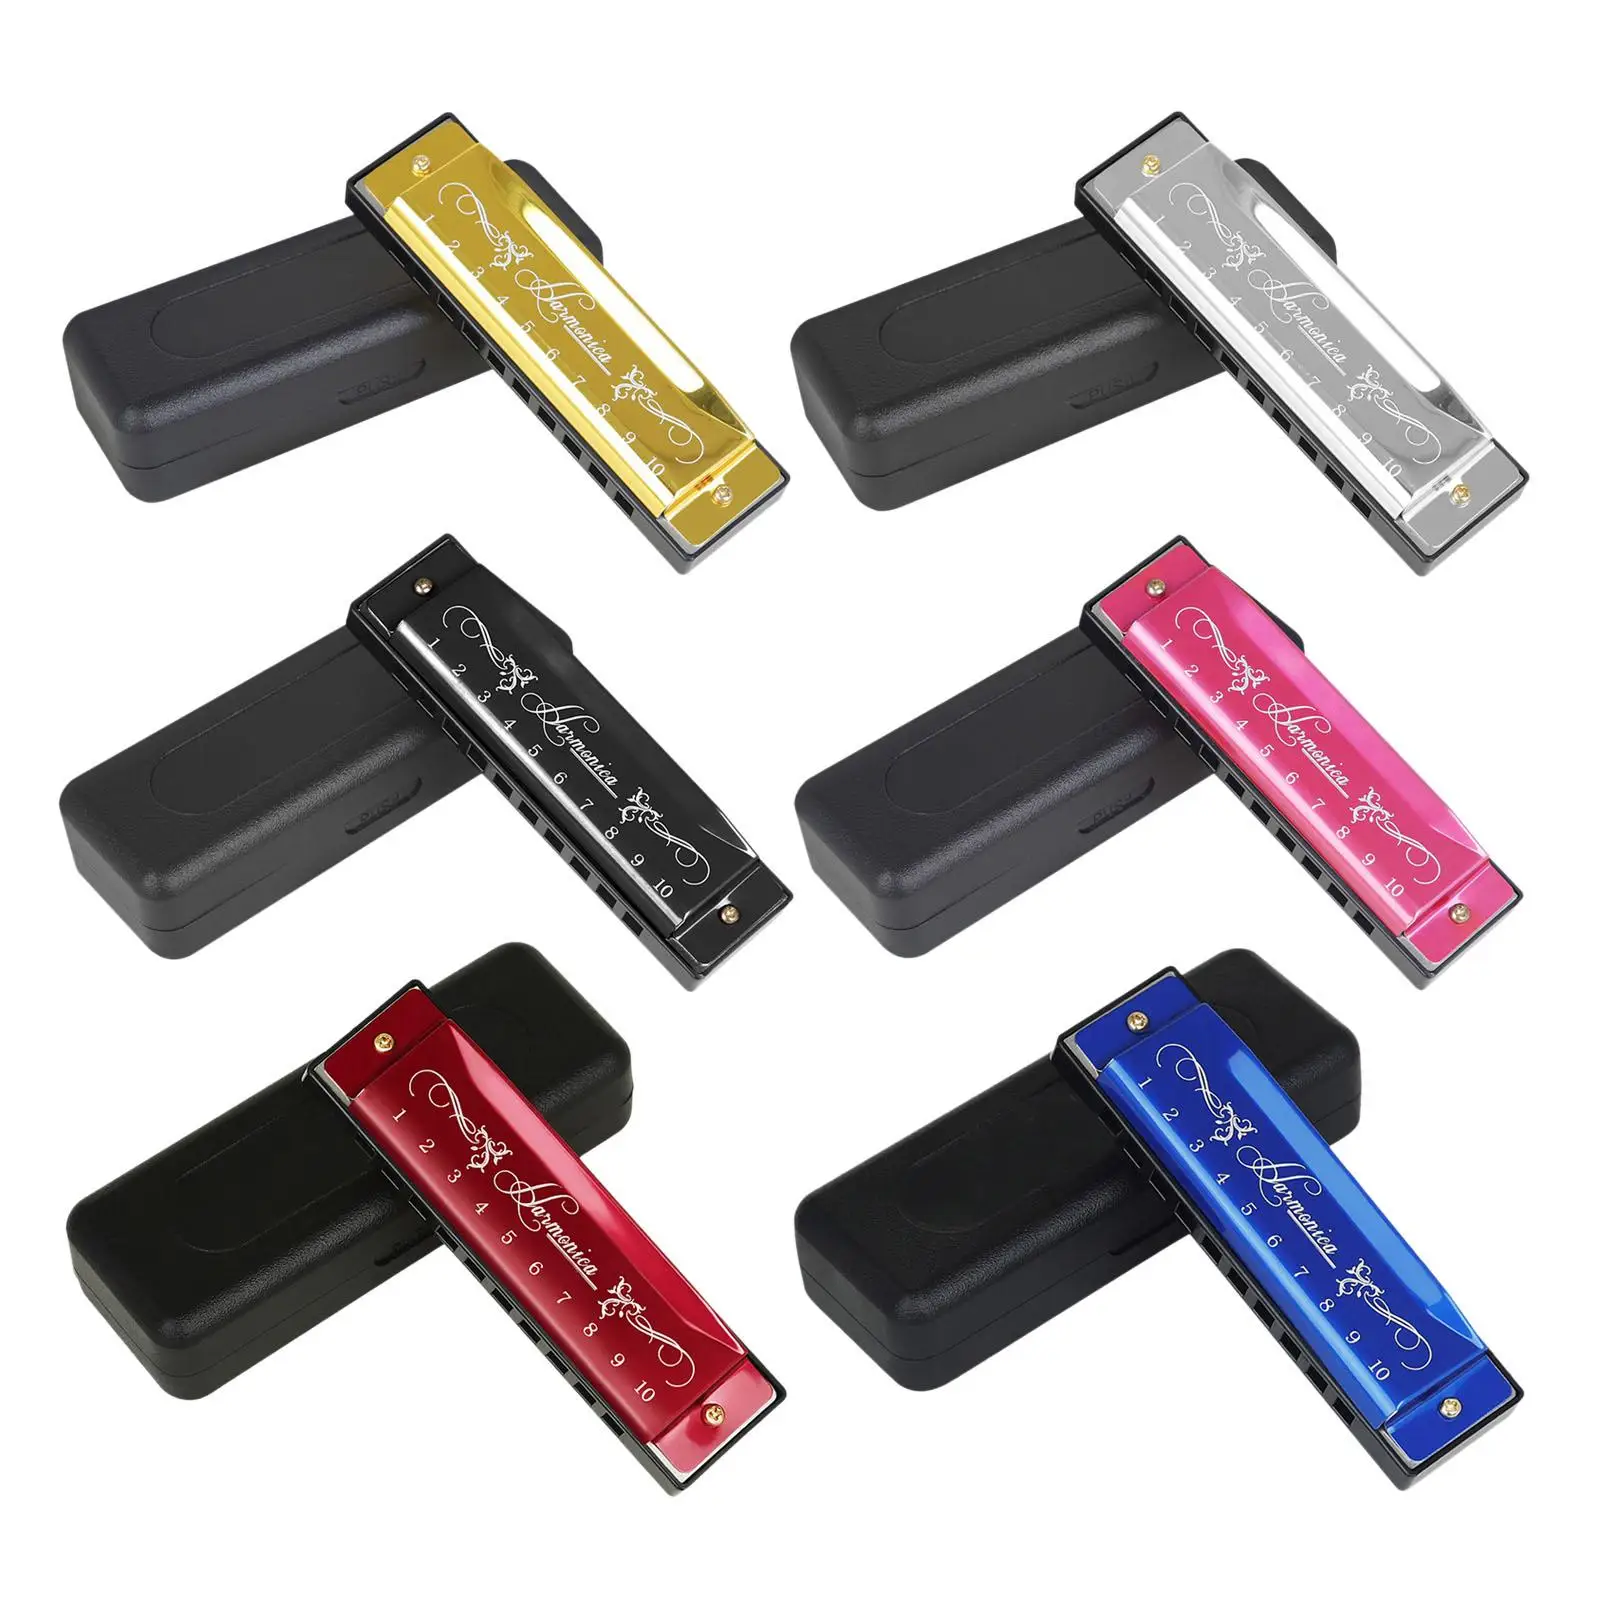 Harmonica Mouth Organ Practical Party Favors Instrument C Key 10 Holes 20 Tunes